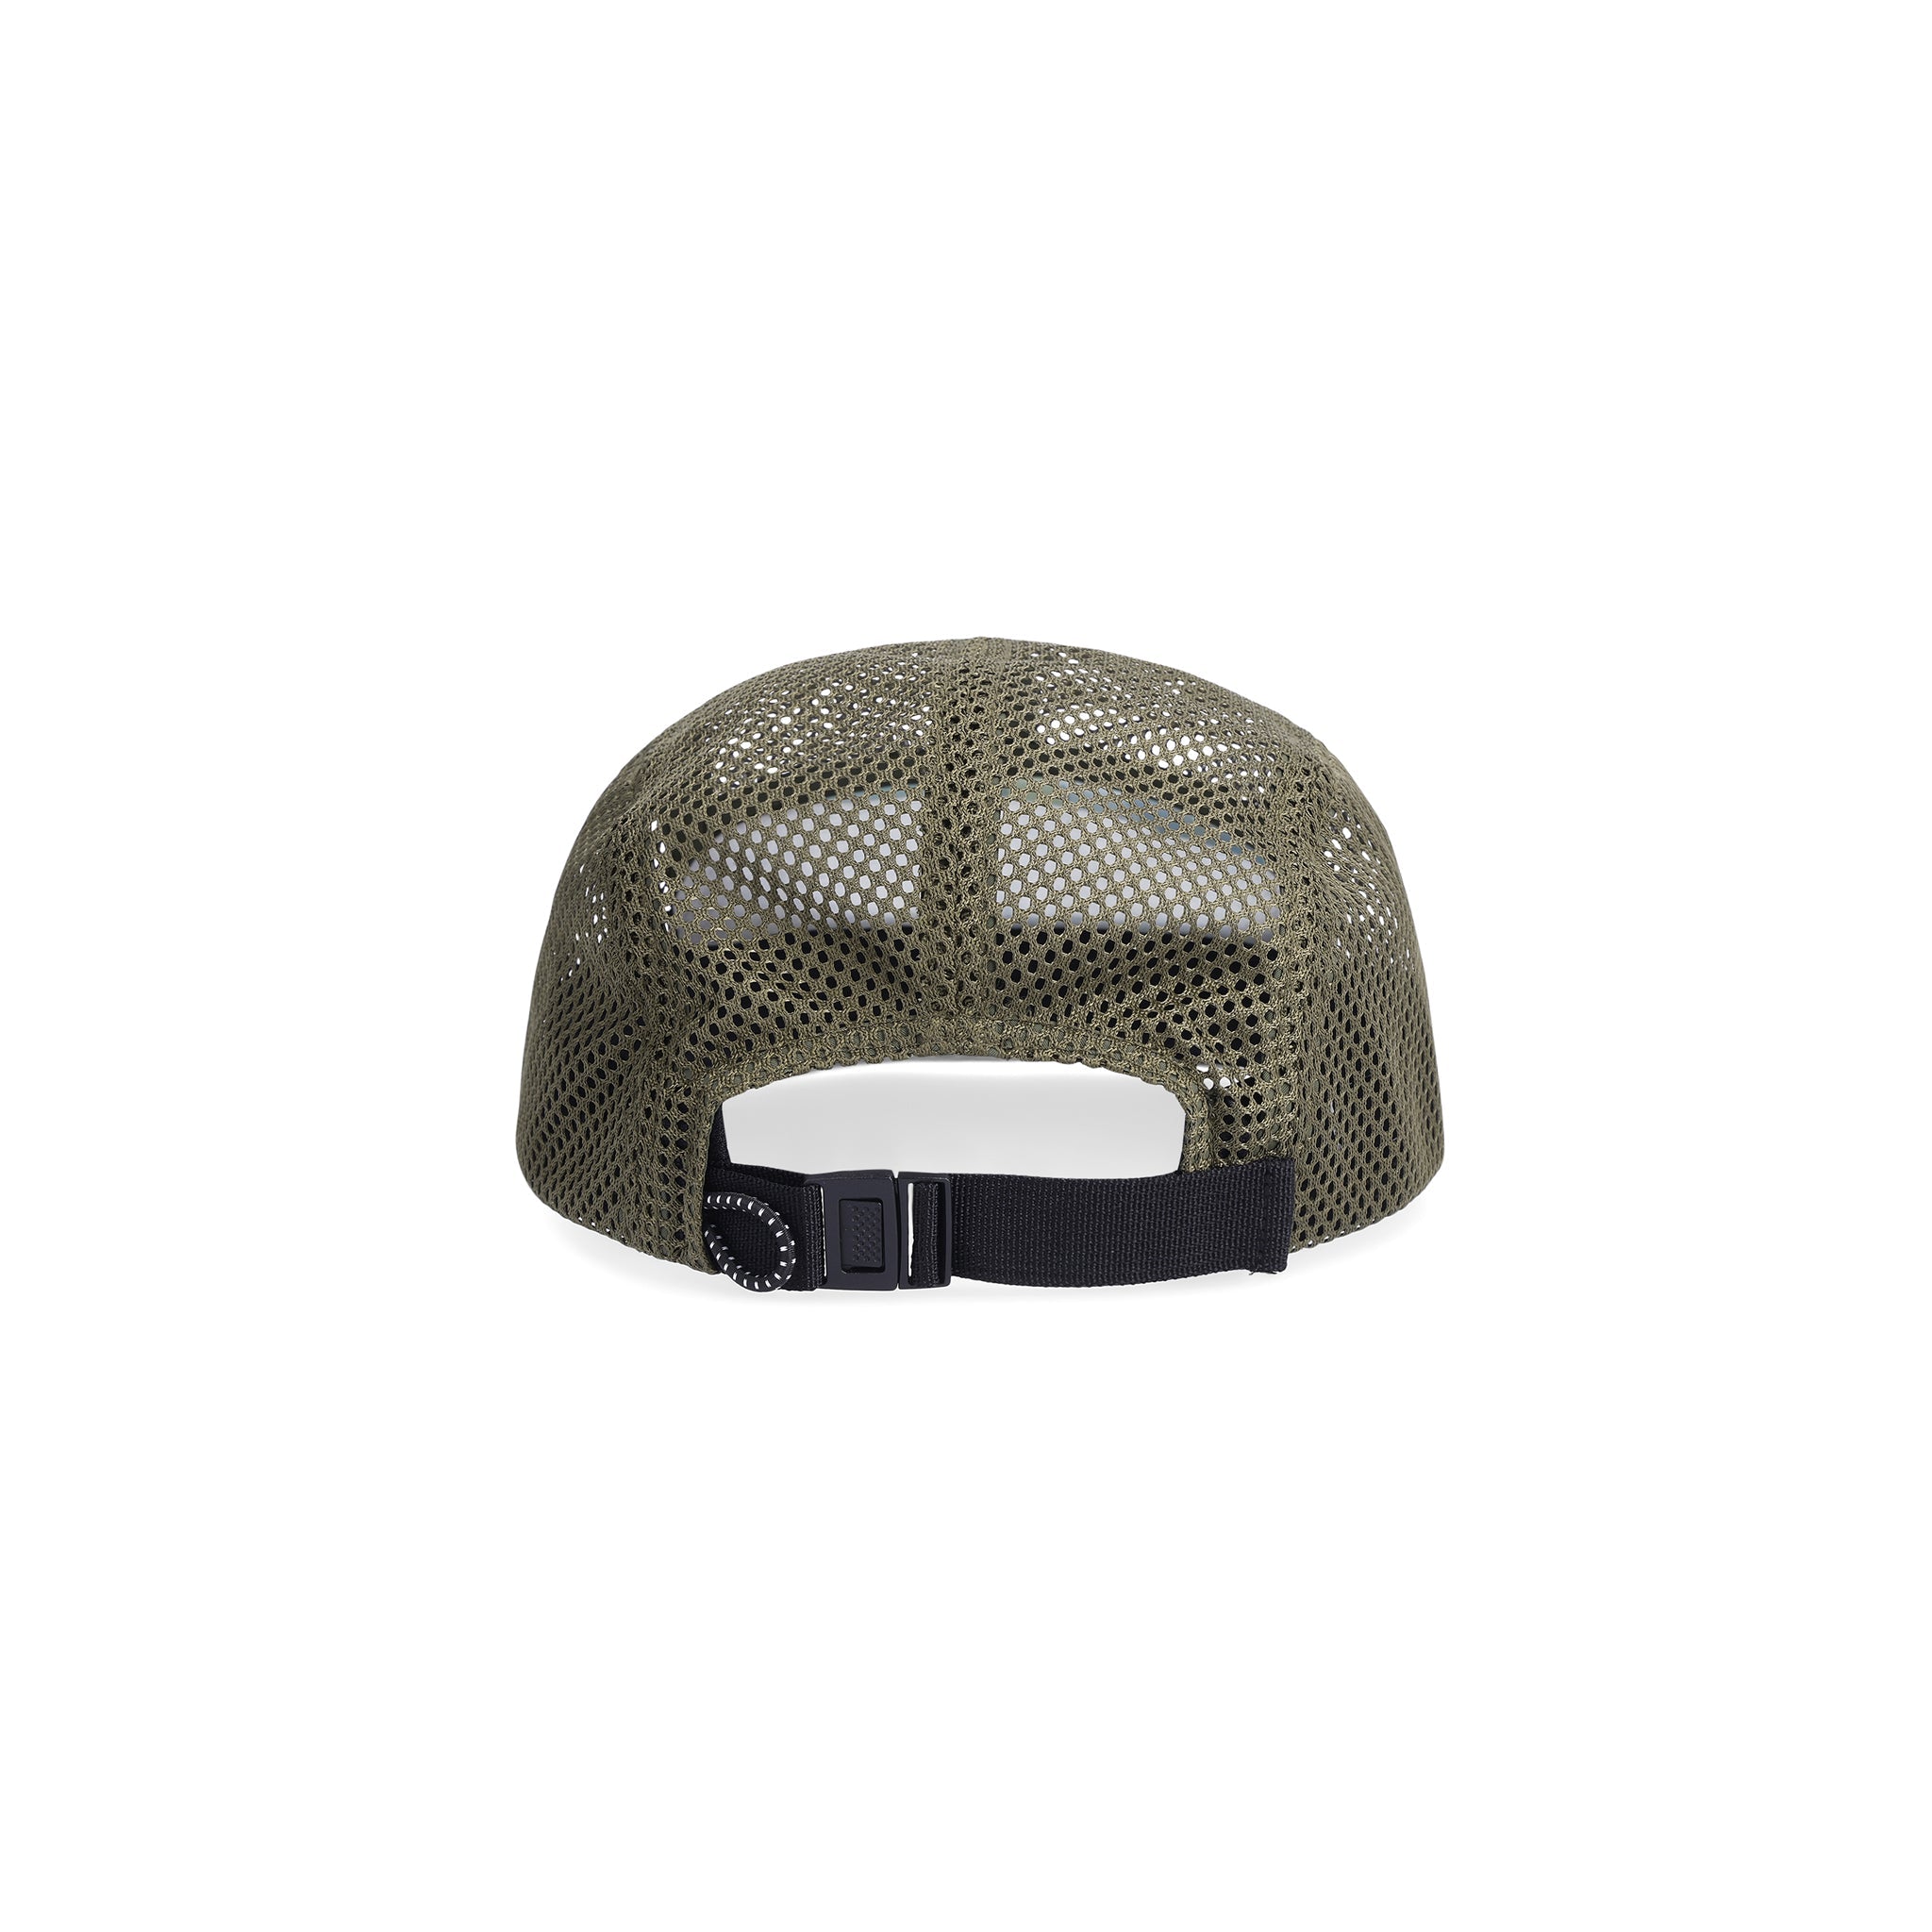 Back shot of Topo Designs Global mesh back Hat in "Green Camo" green. Unstructured 5-panel flexible brim packable hat.